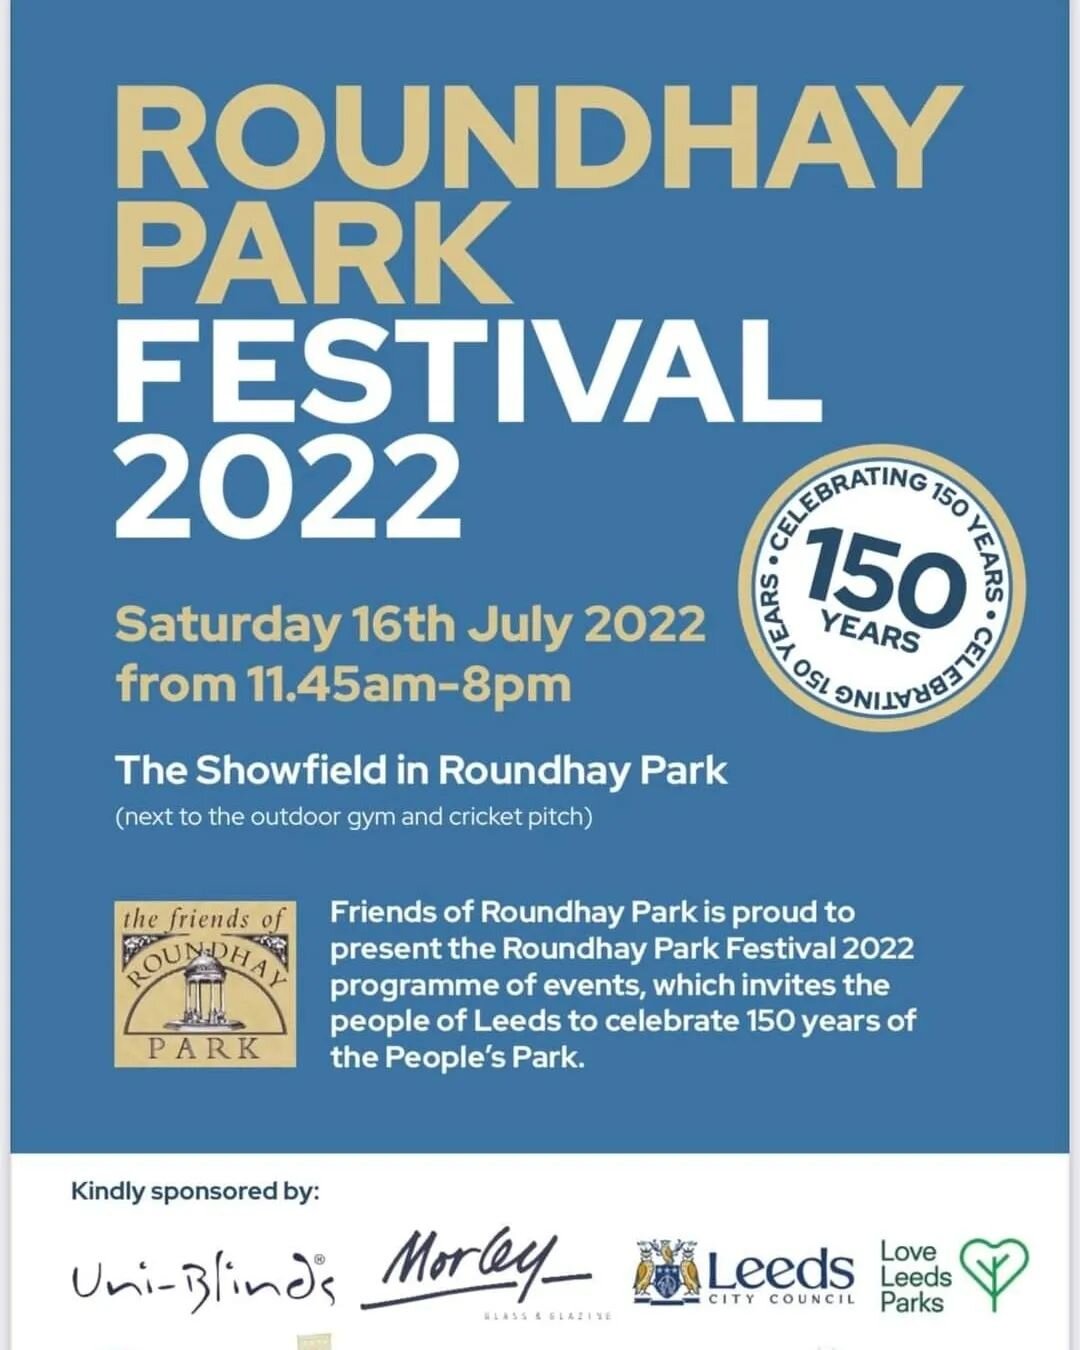 Come and find us today 12pm-8pm at Roundhay Park Festival, Leeds 8.
We have our full range of t-shirts, sweatshirts, hoodies and bracelets.
@friendsofroundhaypark
#friendsofroundhaypark 
#roundhayparkleeds  #christianclothing #christiantshirts #festi